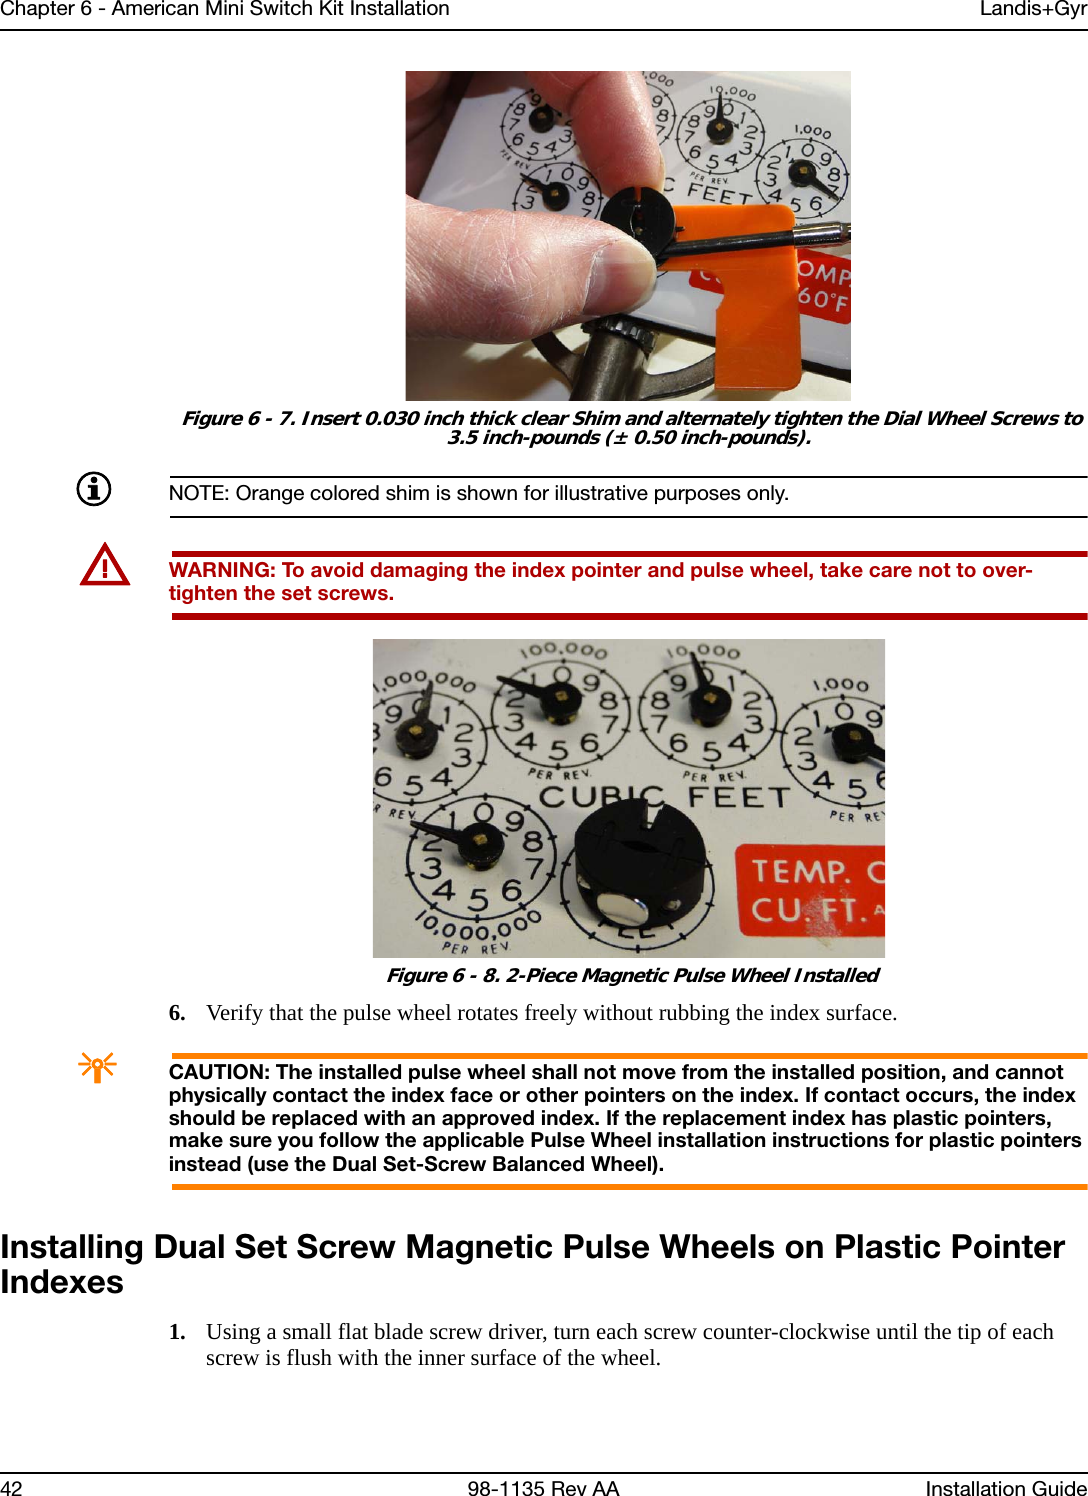 Chapter 6 - American Mini Switch Kit Installation Landis+Gyr42 98-1135 Rev AA Installation Guide Figure 6 - 7. Insert 0.030 inch thick clear Shim and alternately tighten the Dial Wheel Screws to 3.5 inch-pounds (± 0.50 inch-pounds).NOTE: Orange colored shim is shown for illustrative purposes only.UWARNING: To avoid damaging the index pointer and pulse wheel, take care not to over-tighten the set screws. Figure 6 - 8. 2-Piece Magnetic Pulse Wheel Installed6. Verify that the pulse wheel rotates freely without rubbing the index surface.ACAUTION: The installed pulse wheel shall not move from the installed position, and cannot physically contact the index face or other pointers on the index. If contact occurs, the index should be replaced with an approved index. If the replacement index has plastic pointers, make sure you follow the applicable Pulse Wheel installation instructions for plastic pointers instead (use the Dual Set-Screw Balanced Wheel).Installing Dual Set Screw Magnetic Pulse Wheels on Plastic Pointer Indexes1. Using a small flat blade screw driver, turn each screw counter-clockwise until the tip of each screw is flush with the inner surface of the wheel.